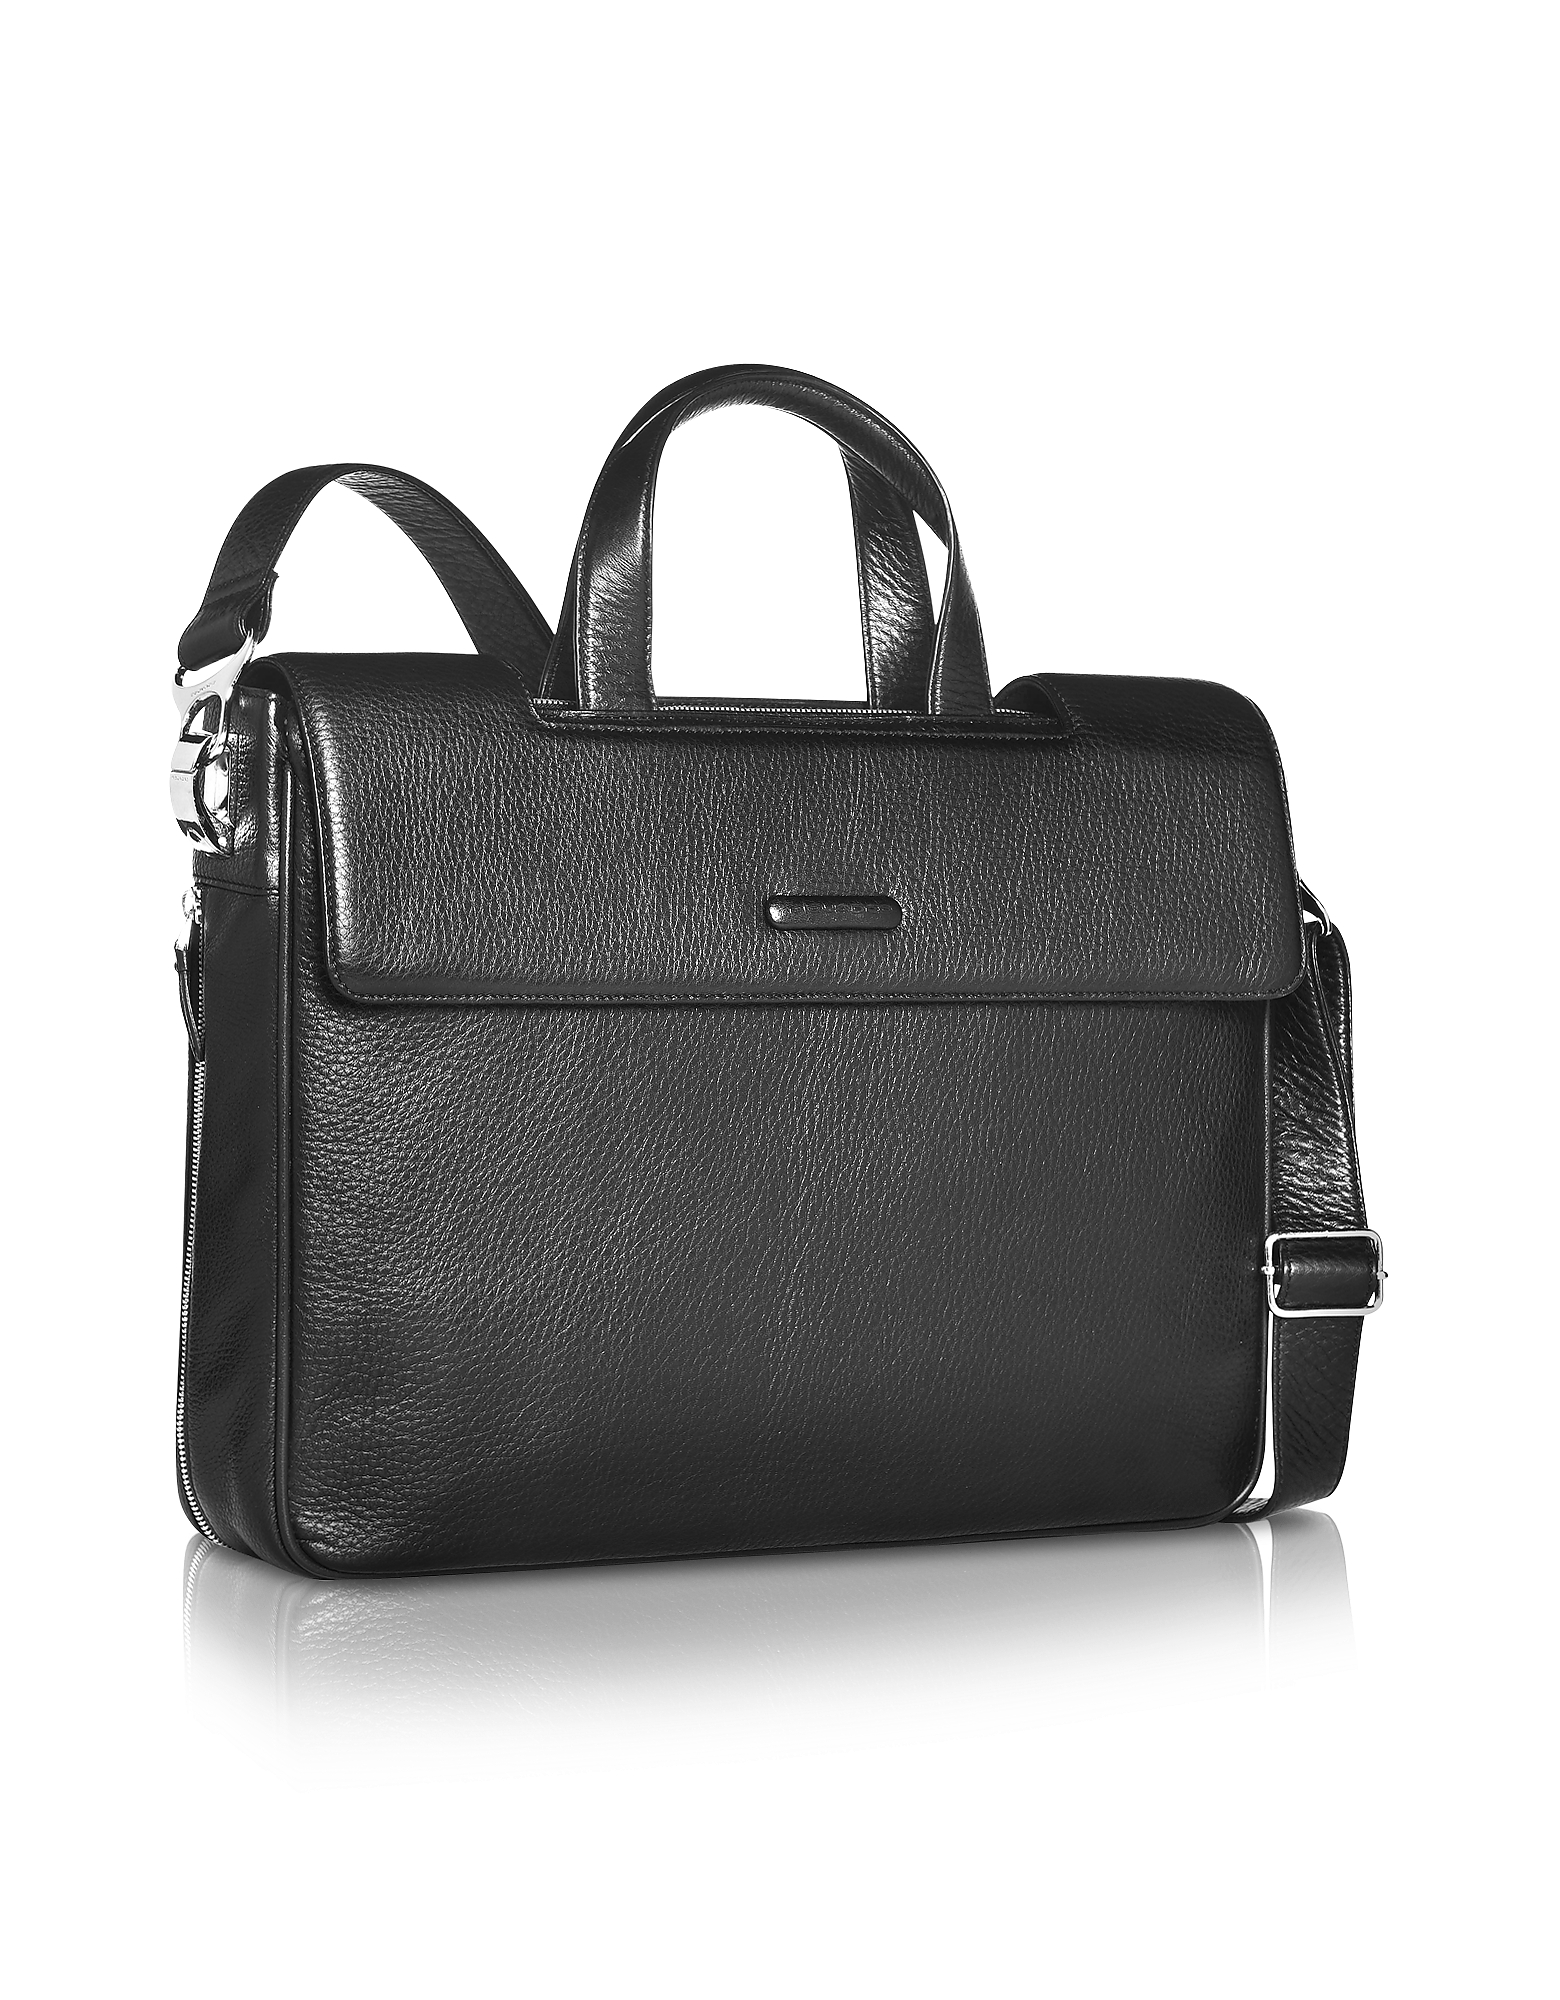 Piquadro Men's Bags, Briefcases, Backpacks | MenStyle USA